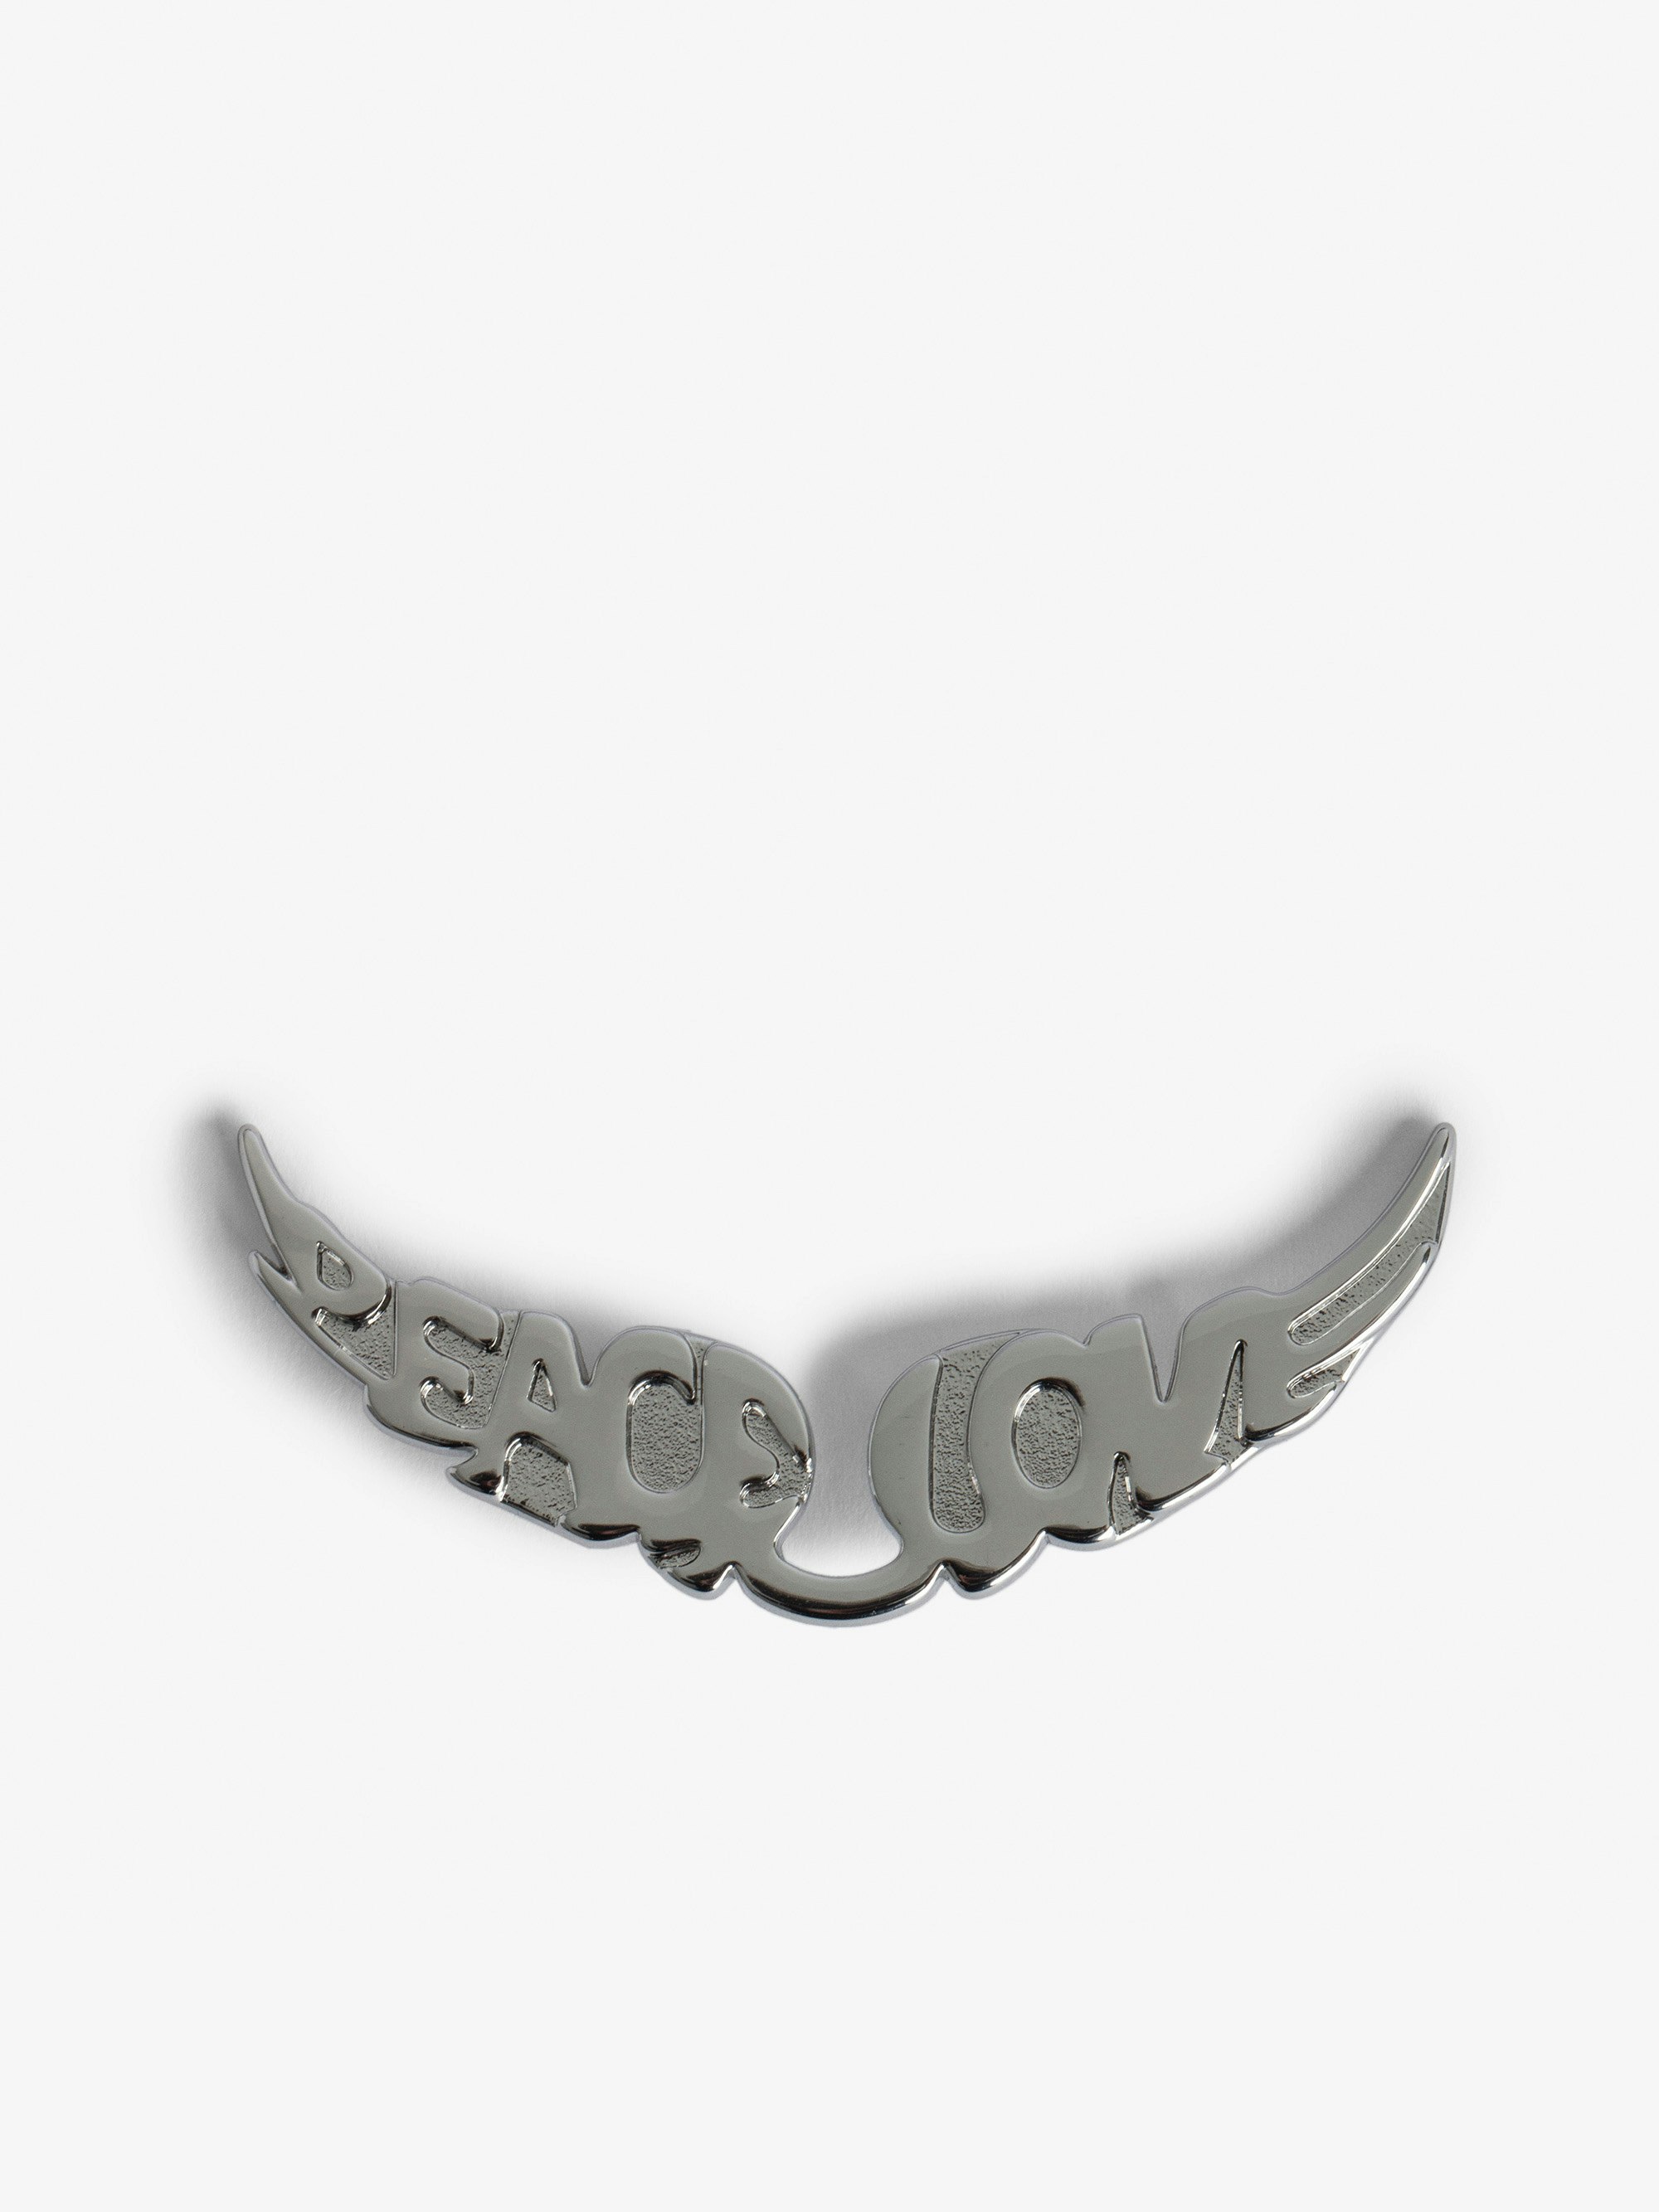 Swing Your Wings Peace Love Charm - Clip-on wings charm for Rock Swing Your Wings clutch.